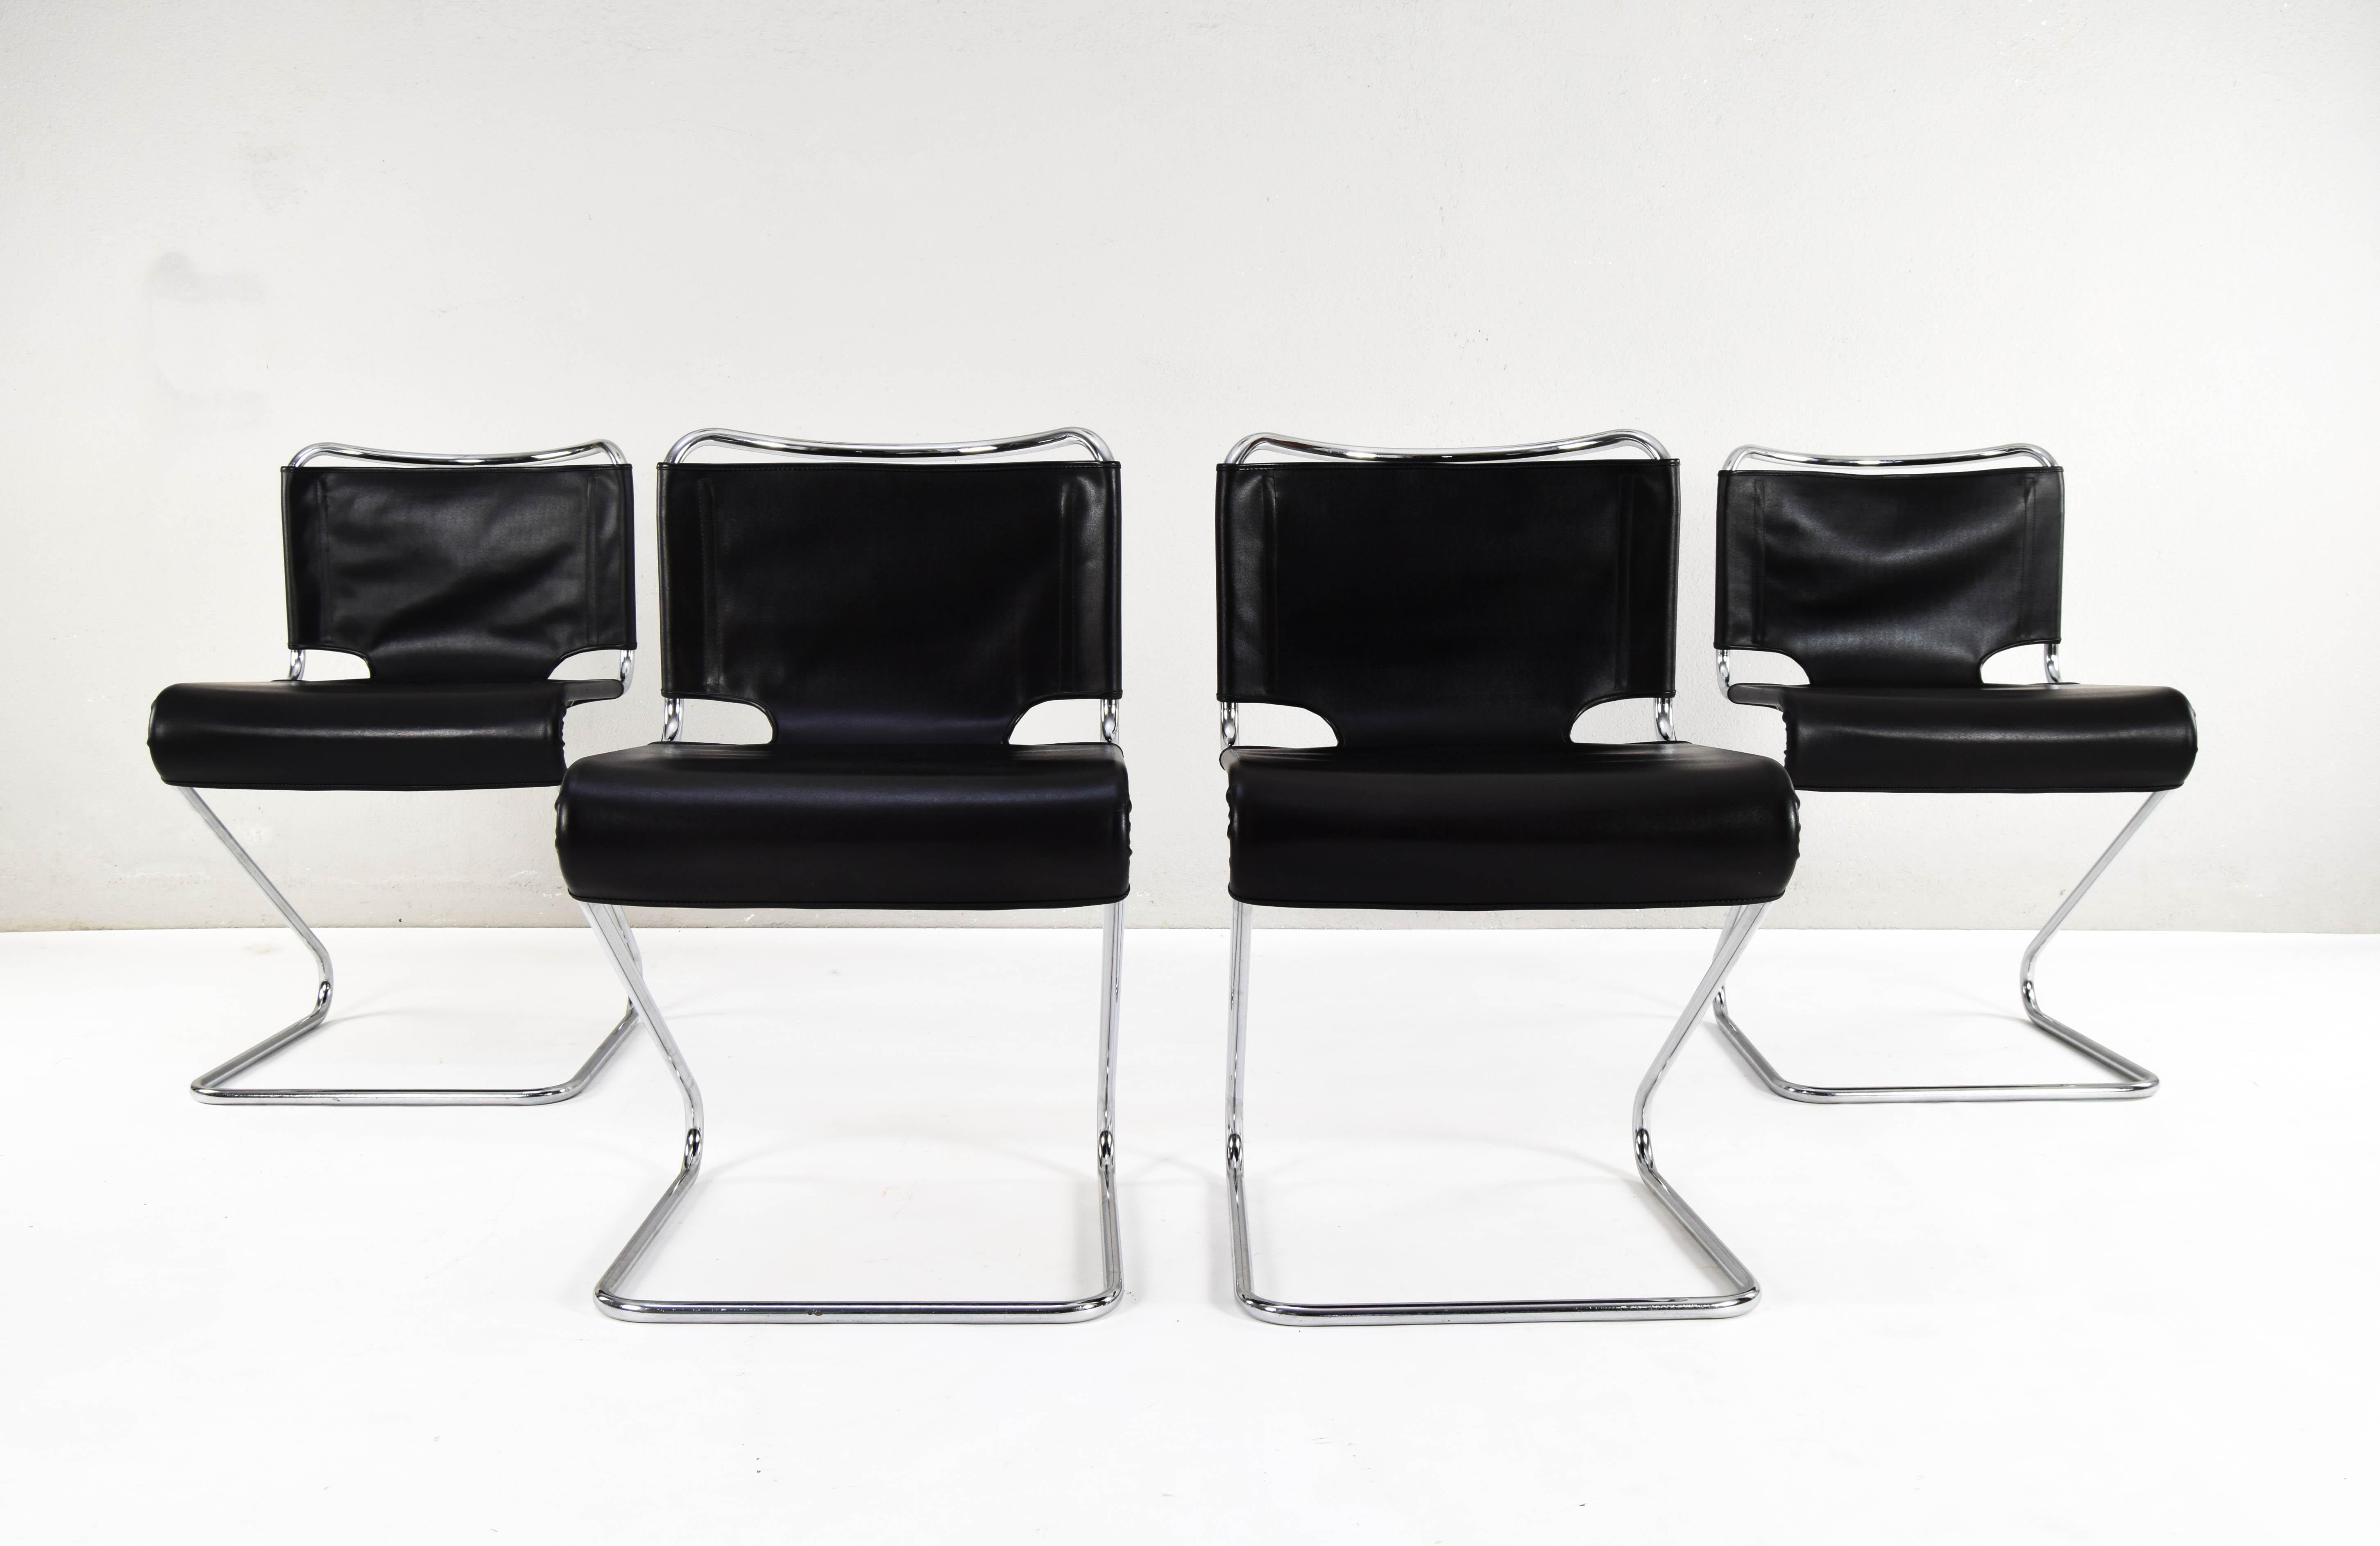 Pascal Mourgue for Steiner, set of 4 'Biscia' stackable dining chairs, steel, vinyl leather, France. Designed in the 60s, this edition belongs to the late 60s or early 70s.

Set of four Biscia model cantilever chairs in black skay. These chairs have